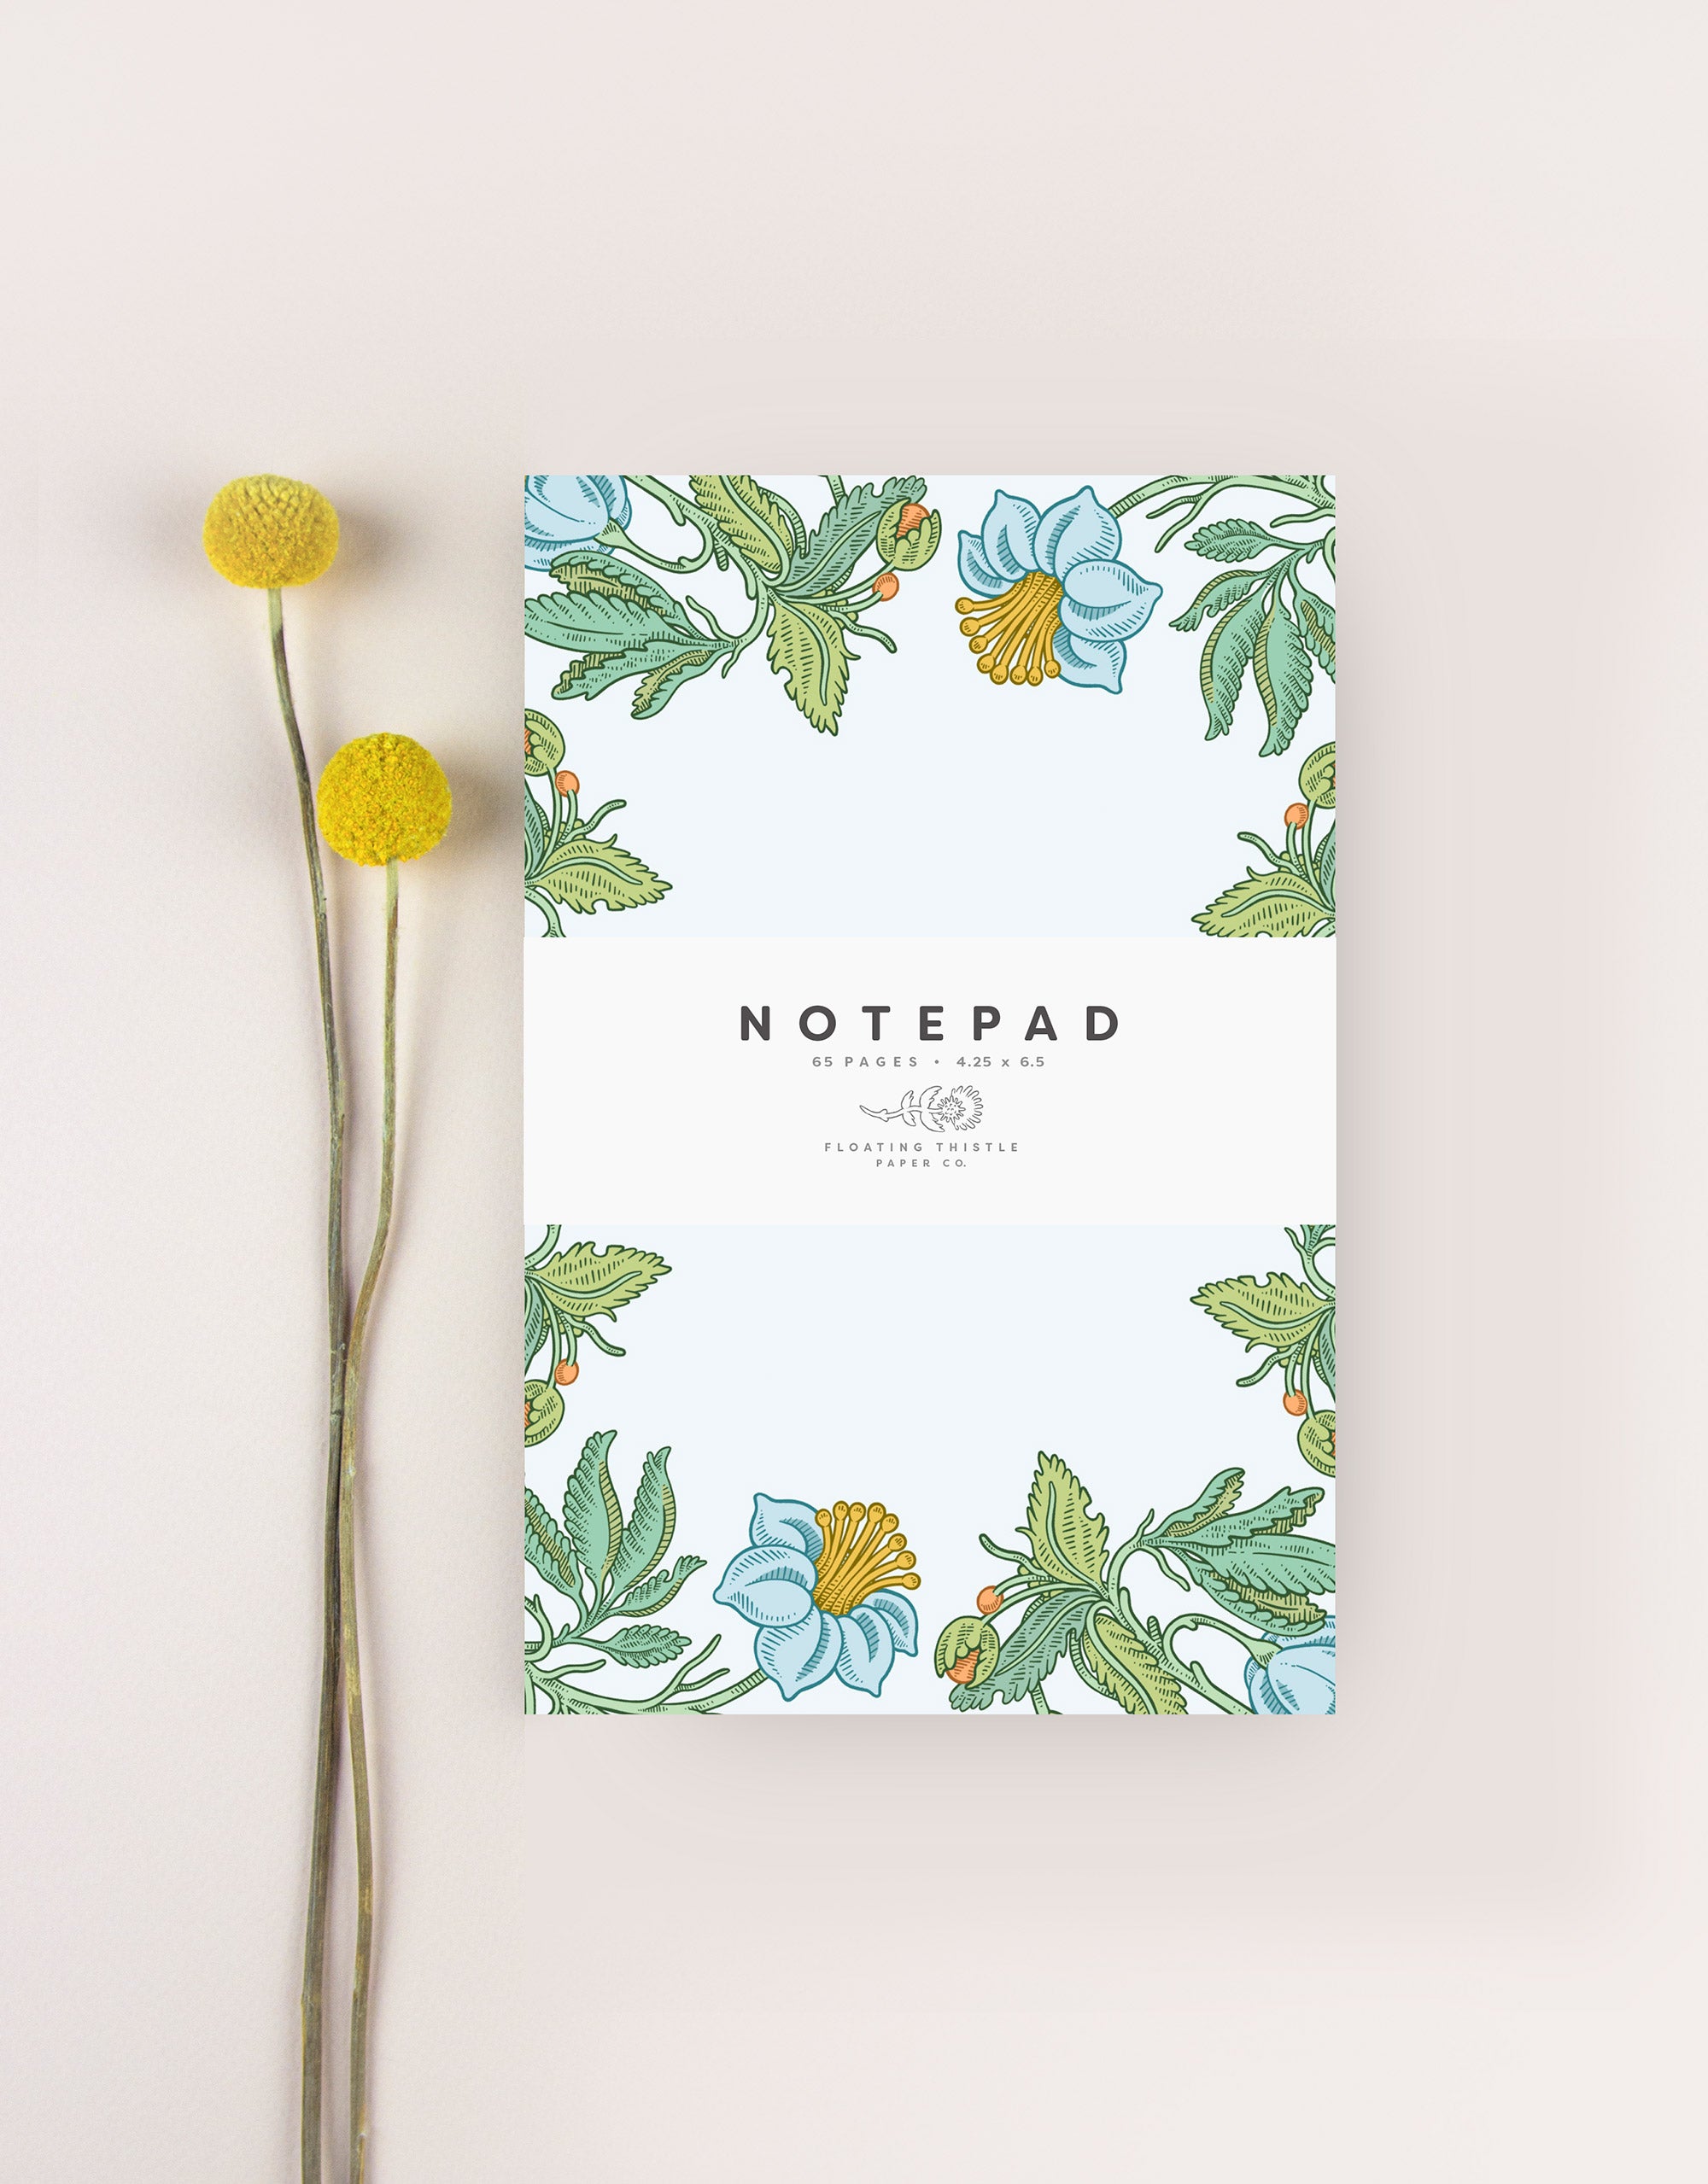 floral notepad with hand drawn elements